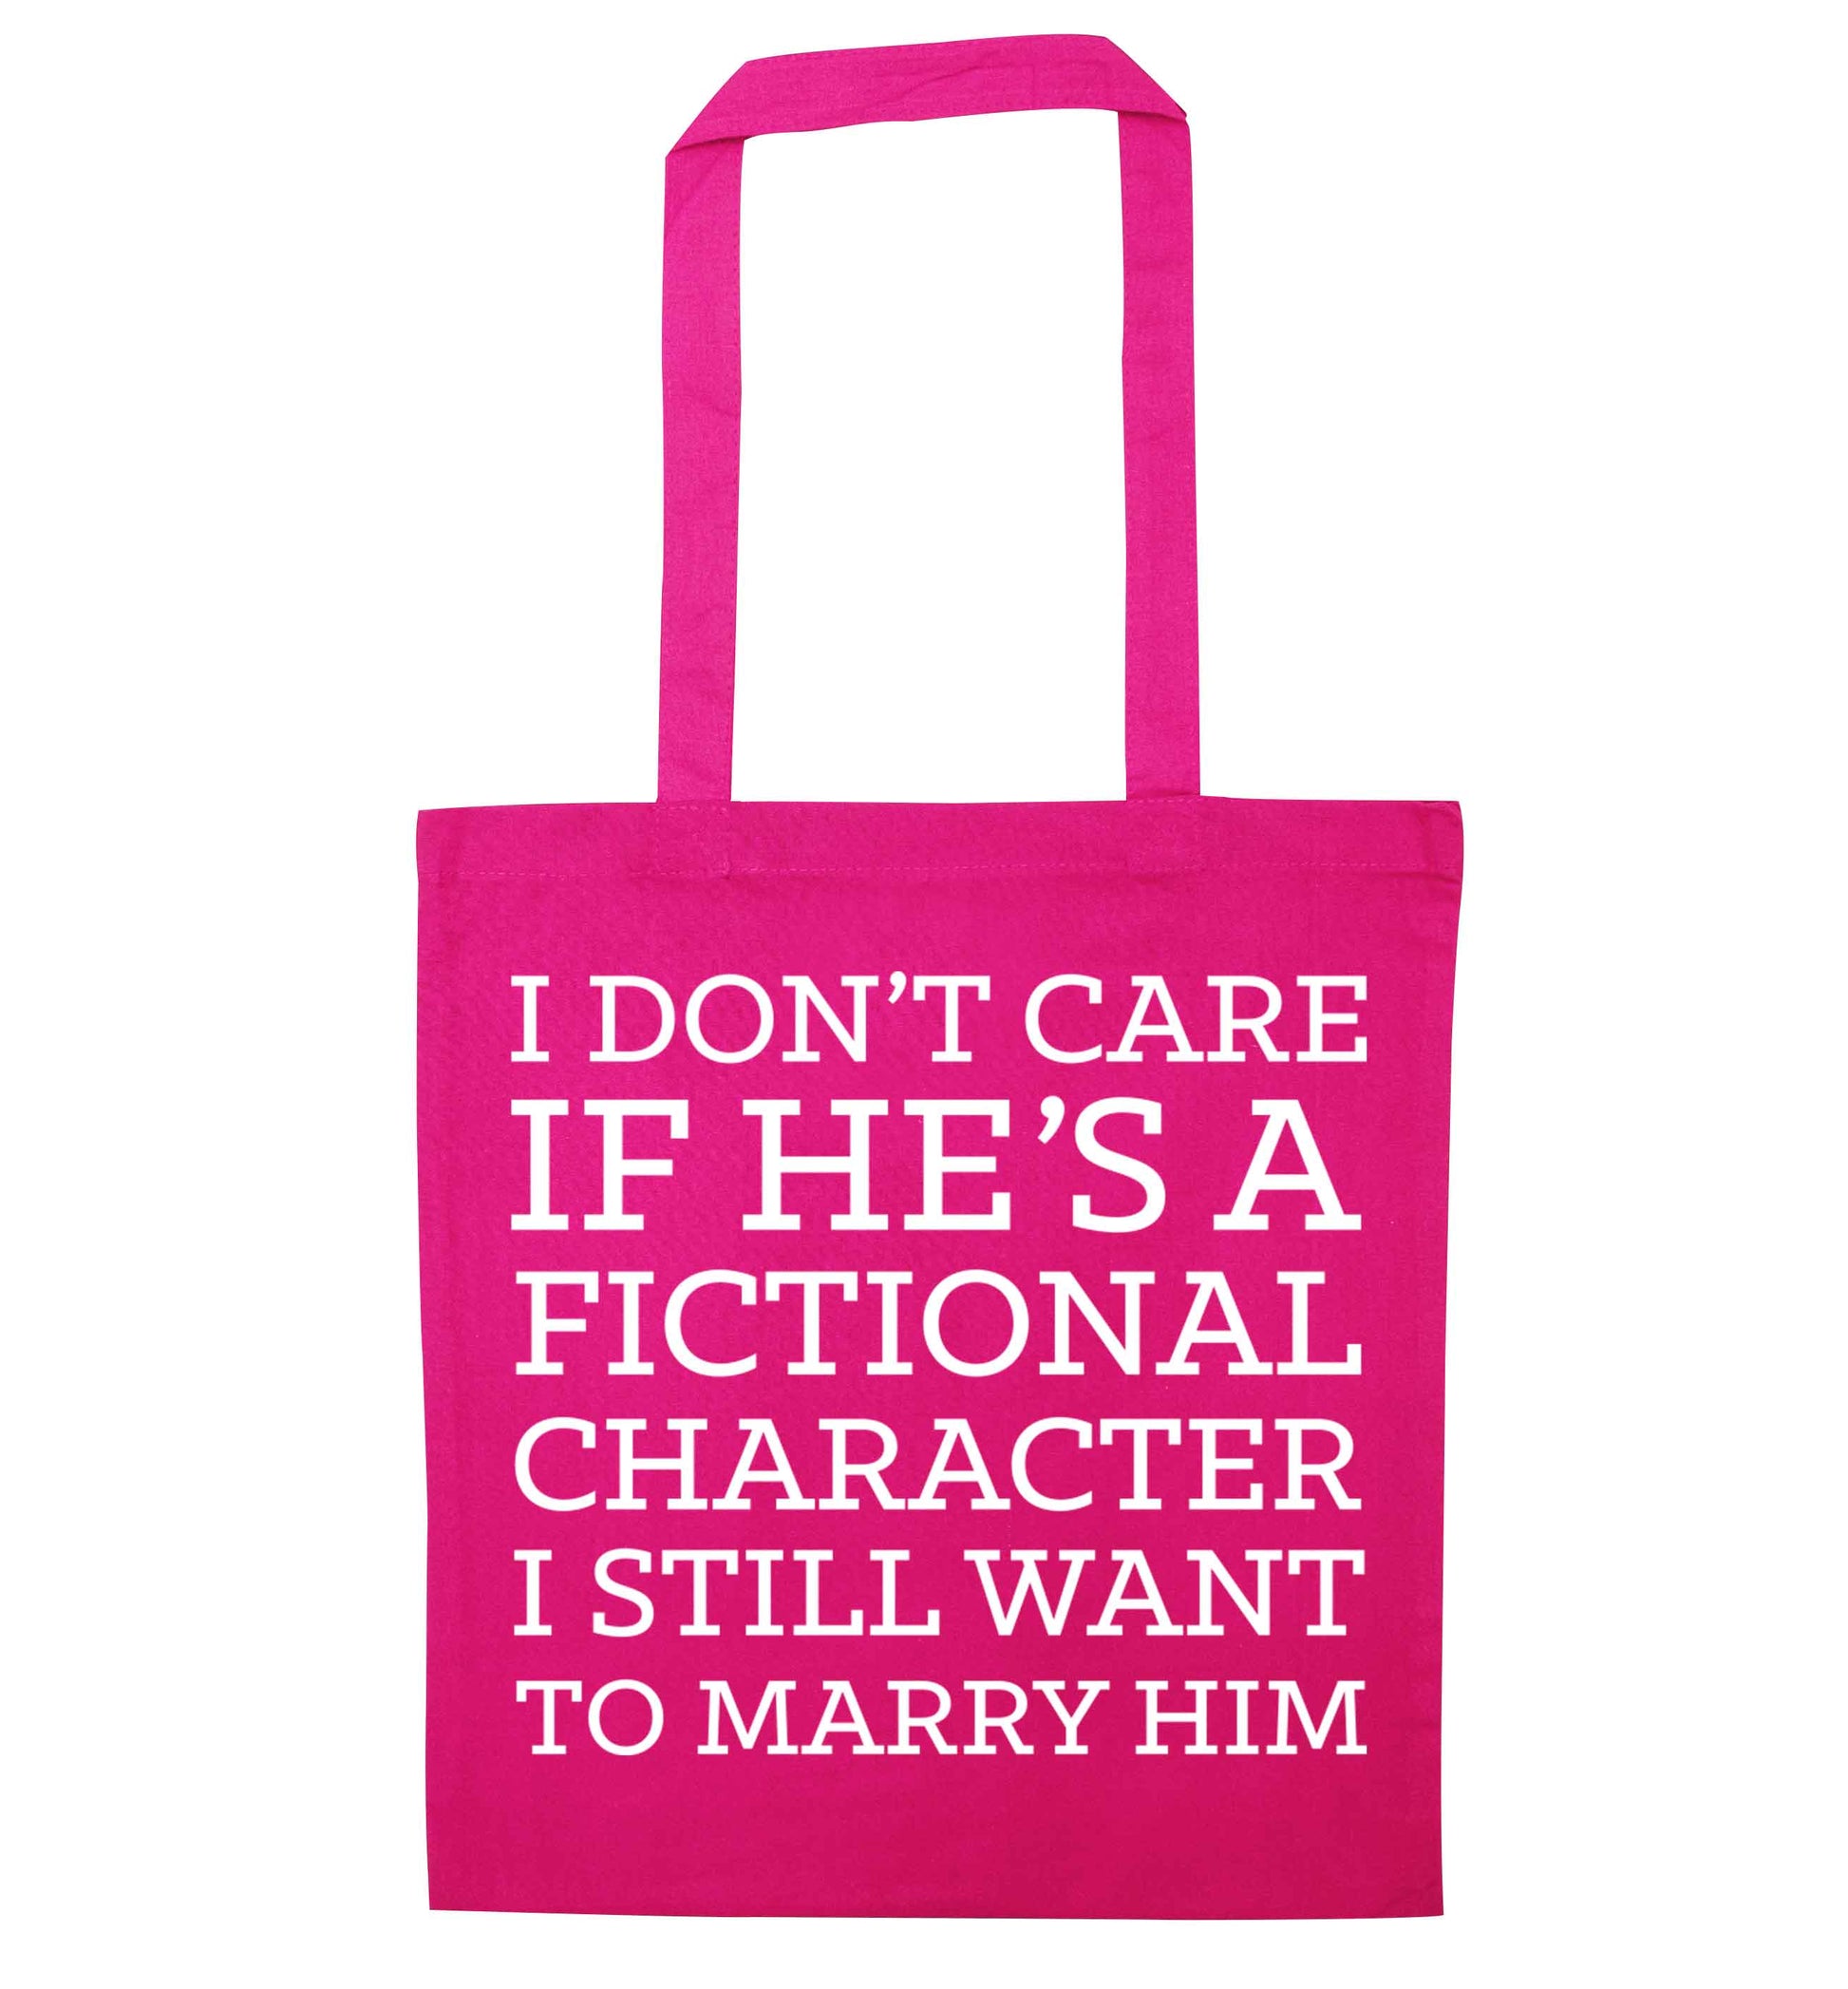 I don't care if he's a fictional character I still want to marry him pink tote bag